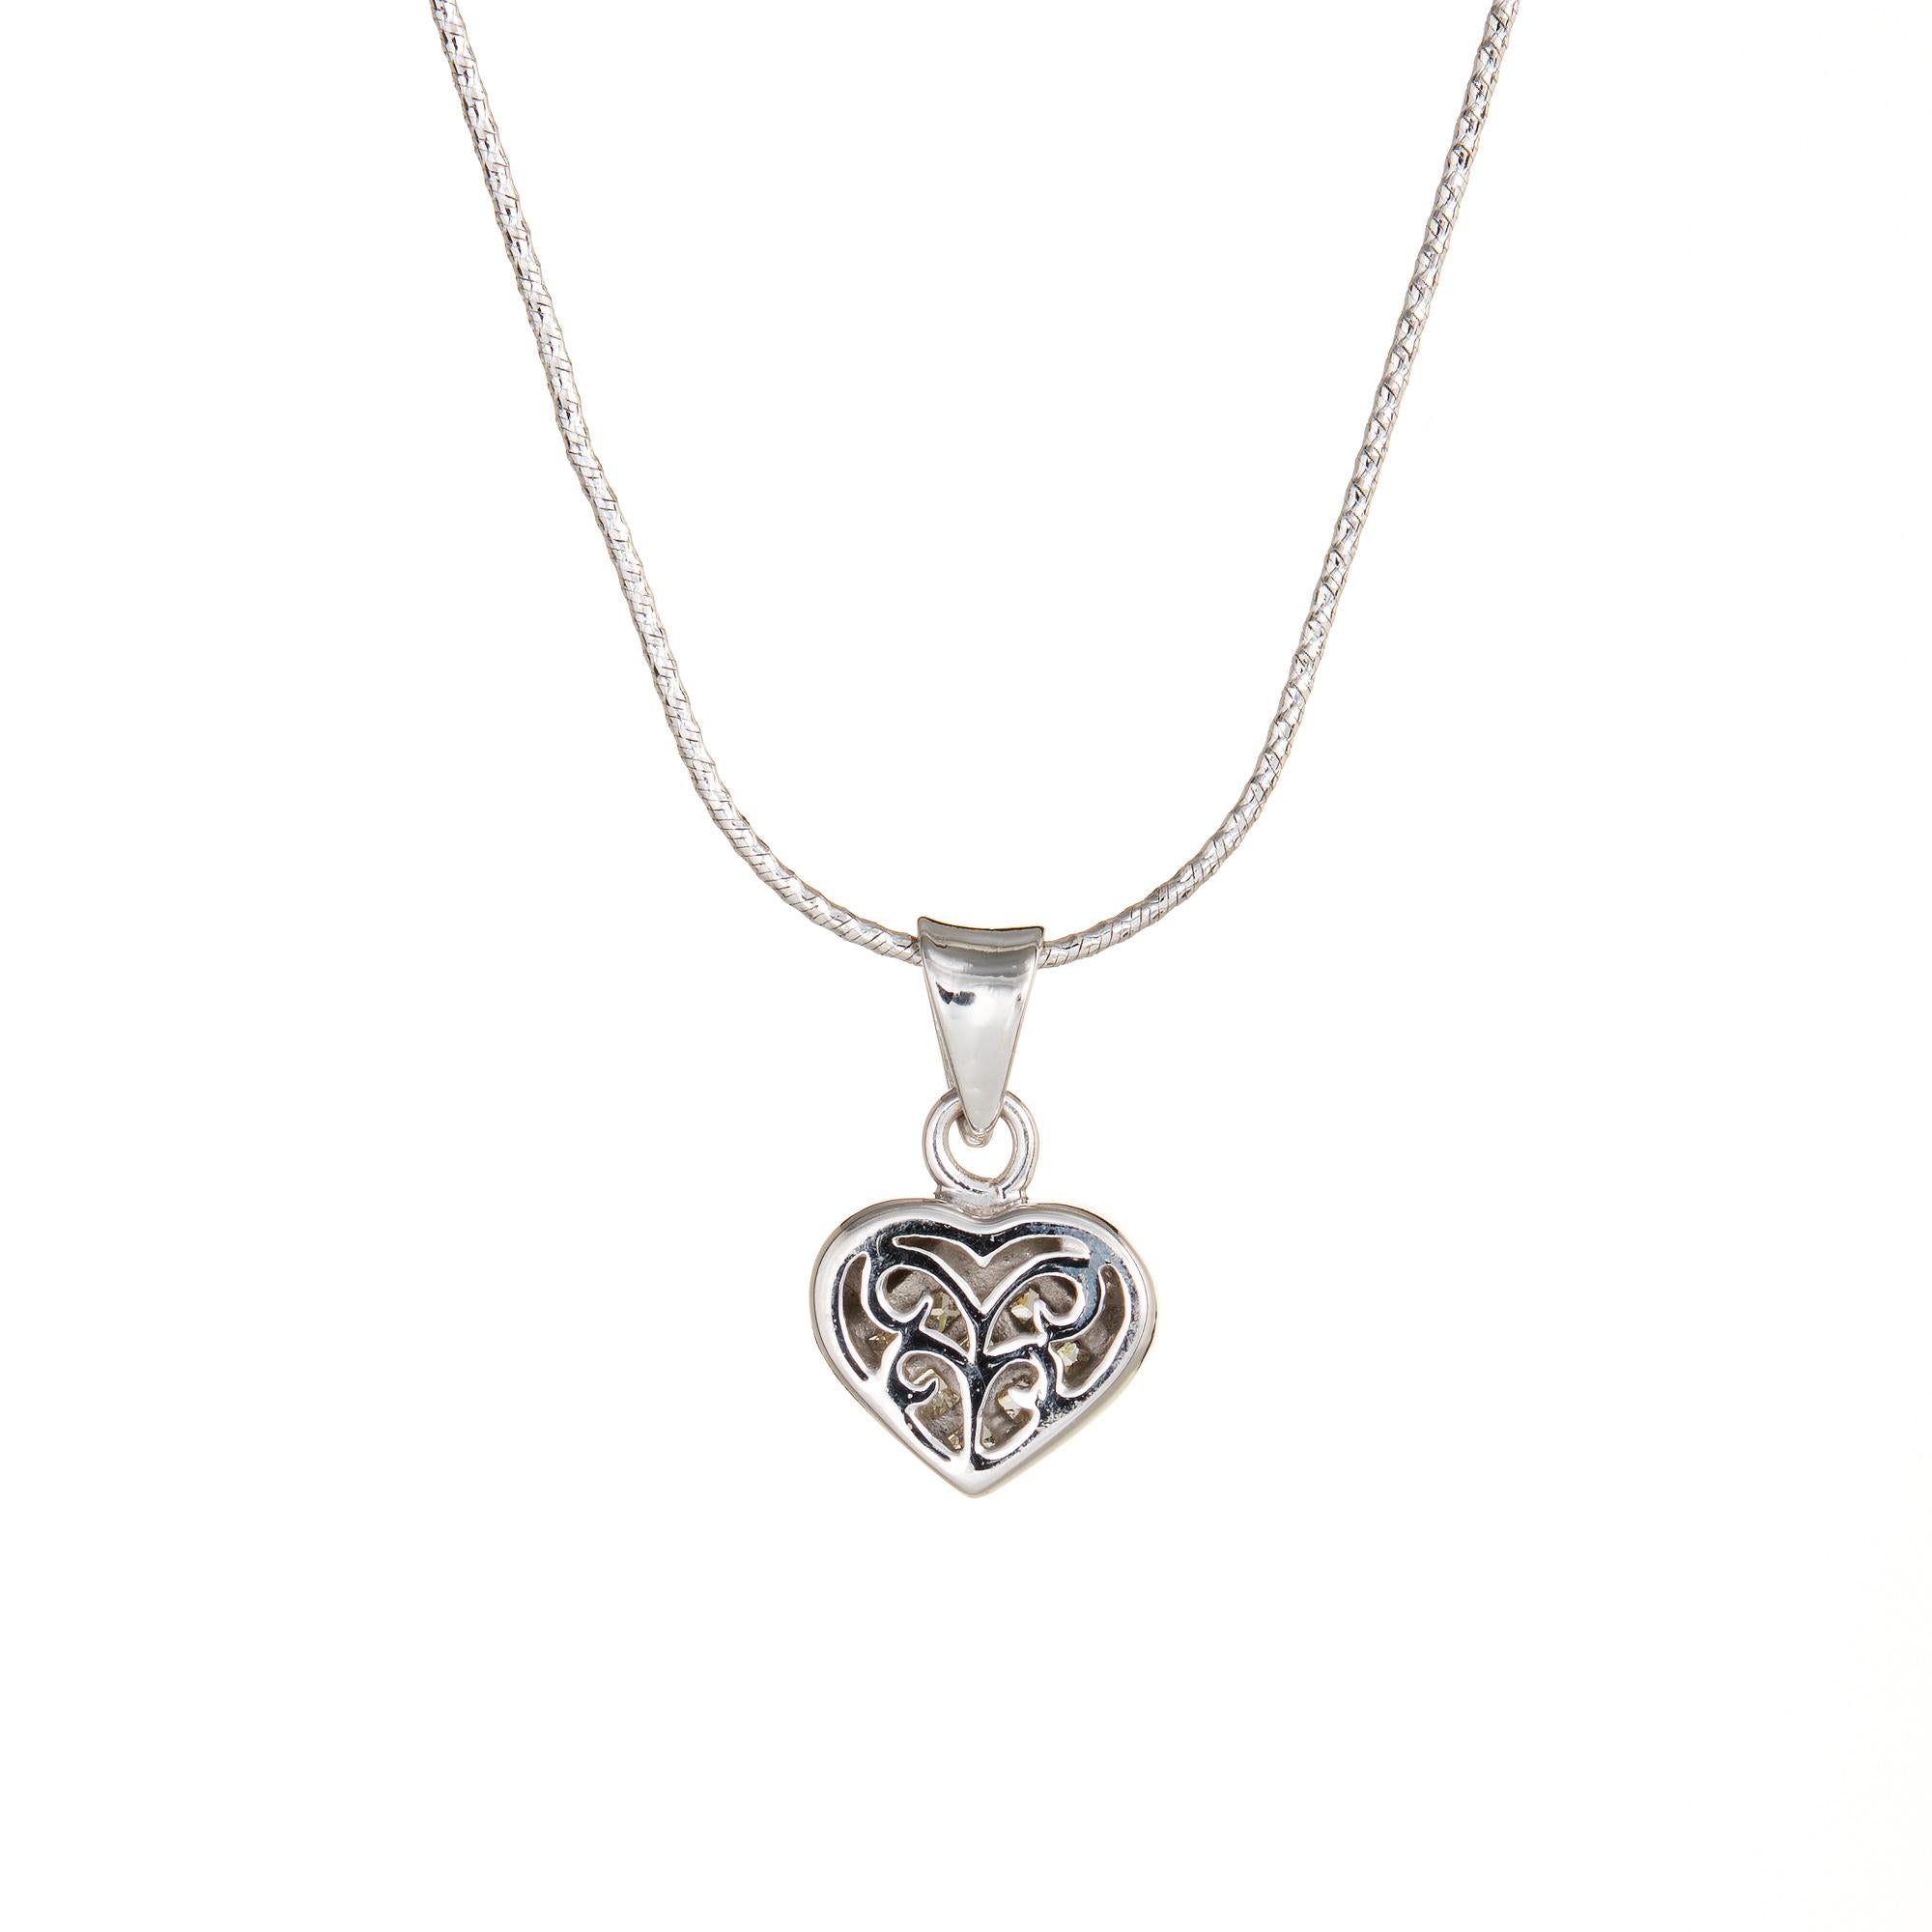 Finely detailed estate diamond heart necklace crafted in 18 karat white gold.  

7 princess cut diamonds total an estimated 0.35 carats (estimated at I-J color and SI1-2 clarity).  

The heart features invisibly set princess cut diamonds. The